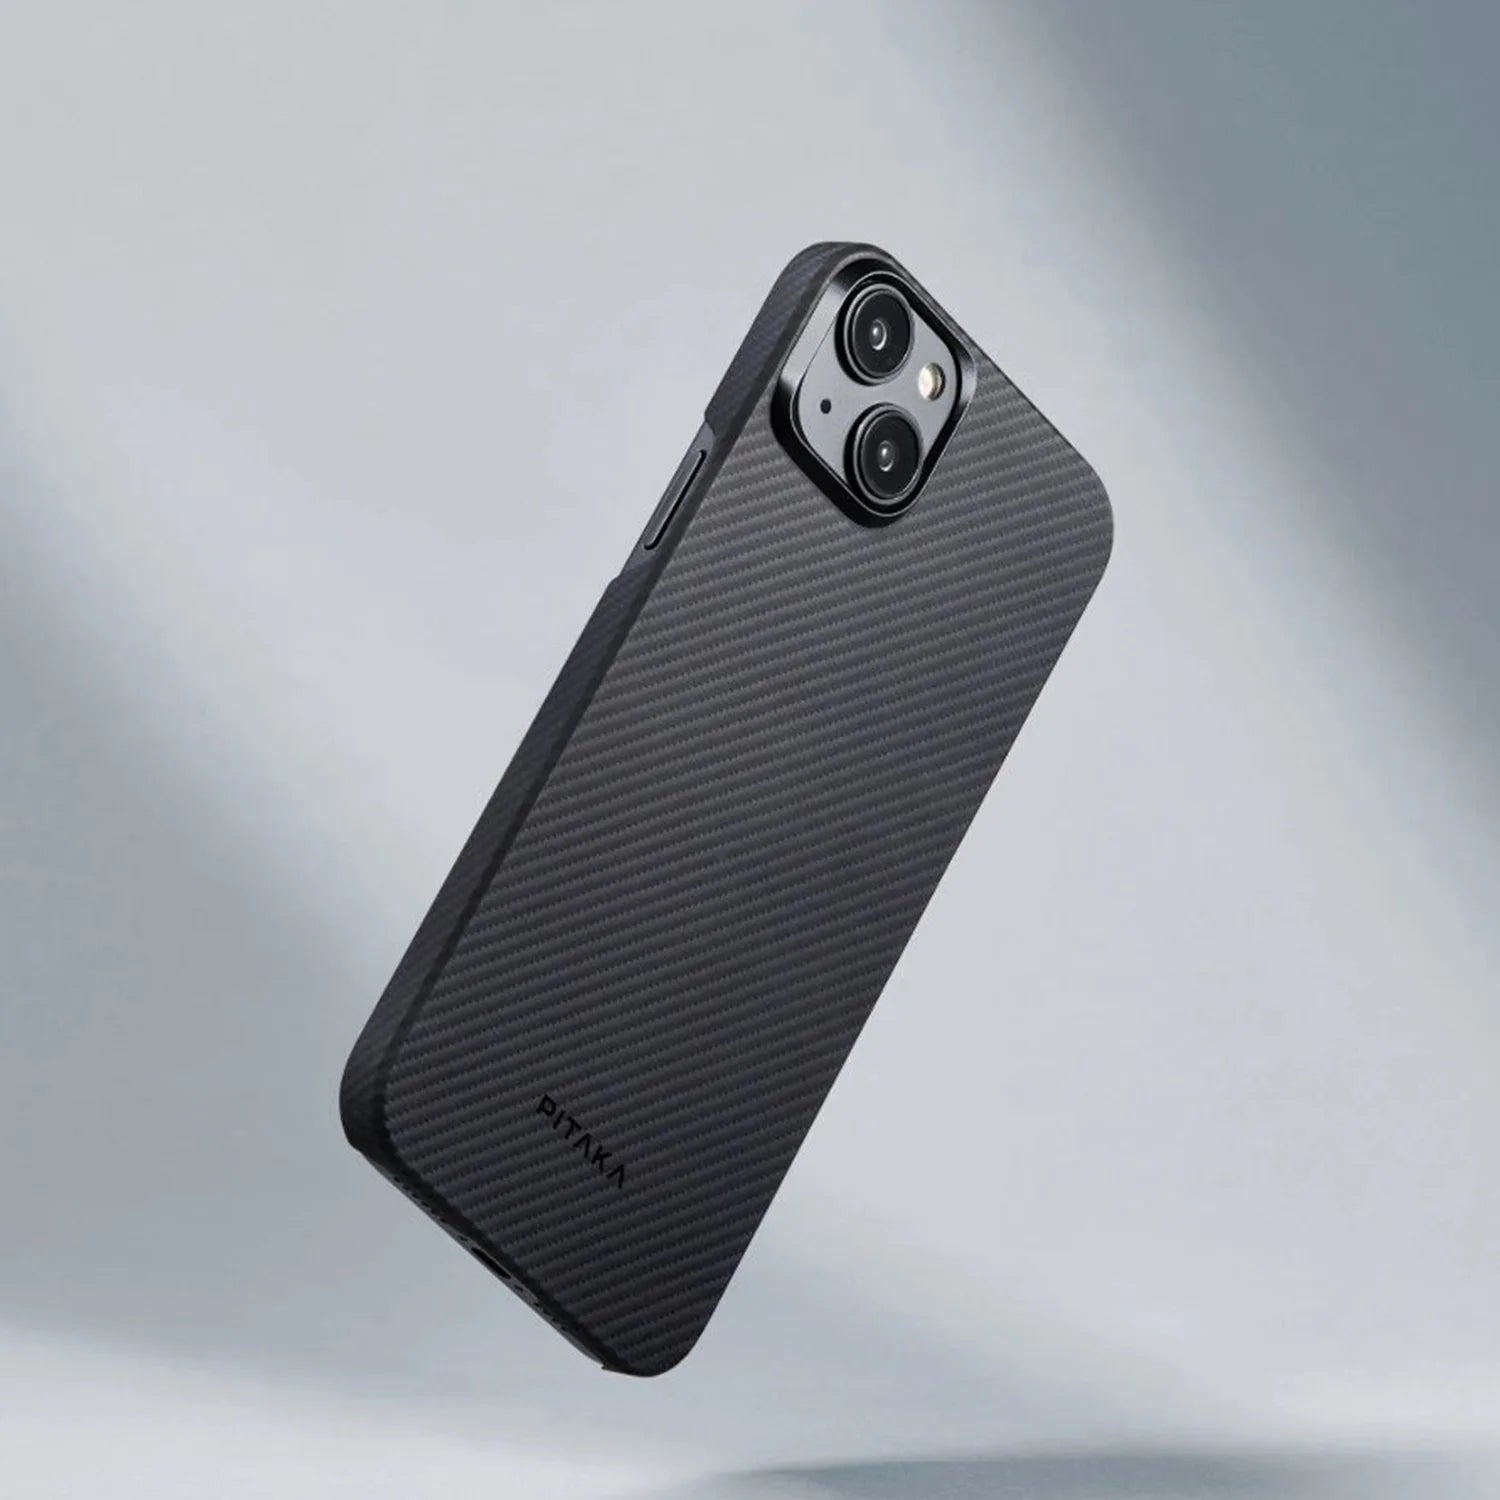 PITAKA 600D MagEZ Case 4 for iPhone 15 Series